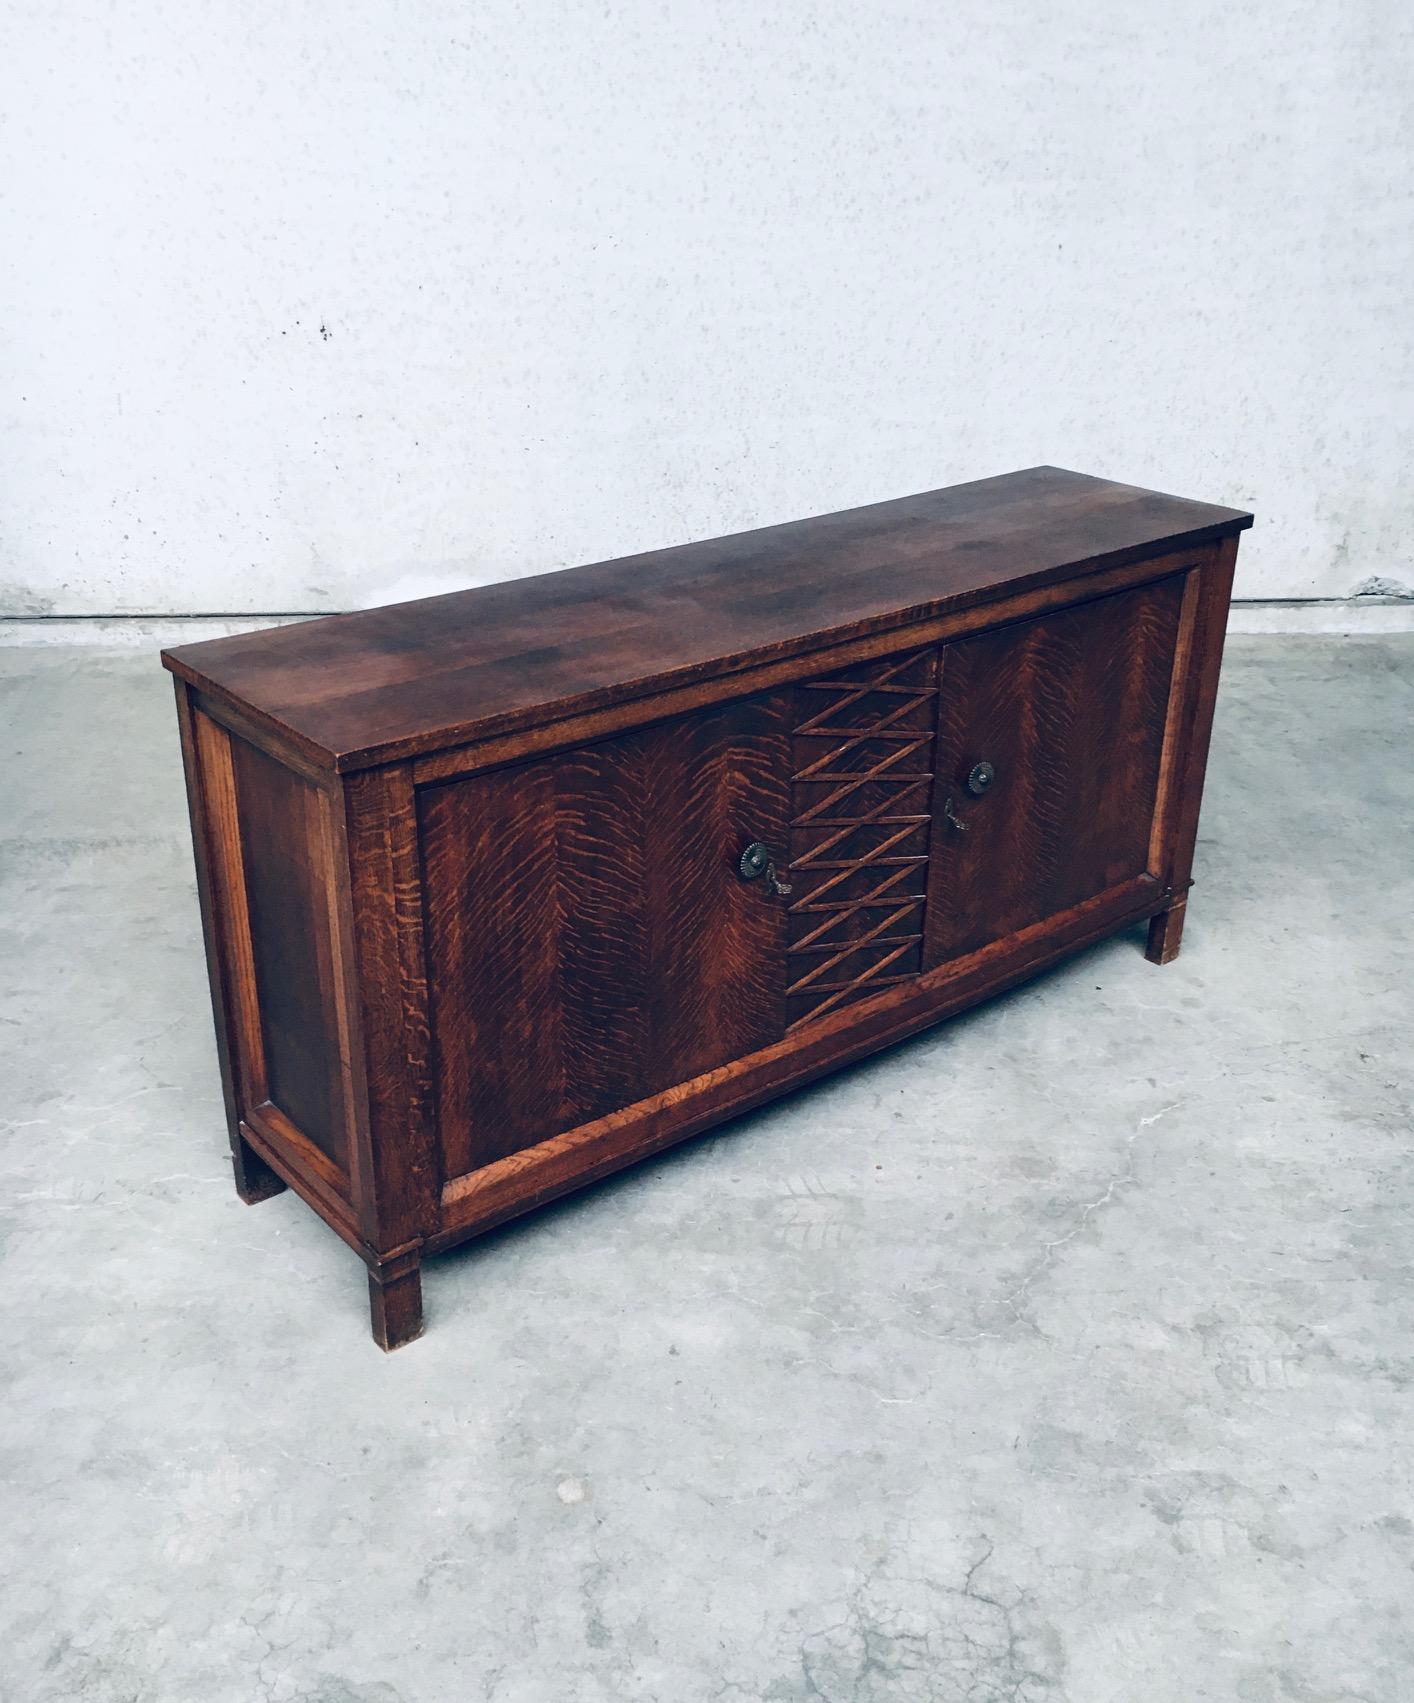 20th Century Arts & Crafts Mission Design Sideboard Credenza Buffet, France, 1900s